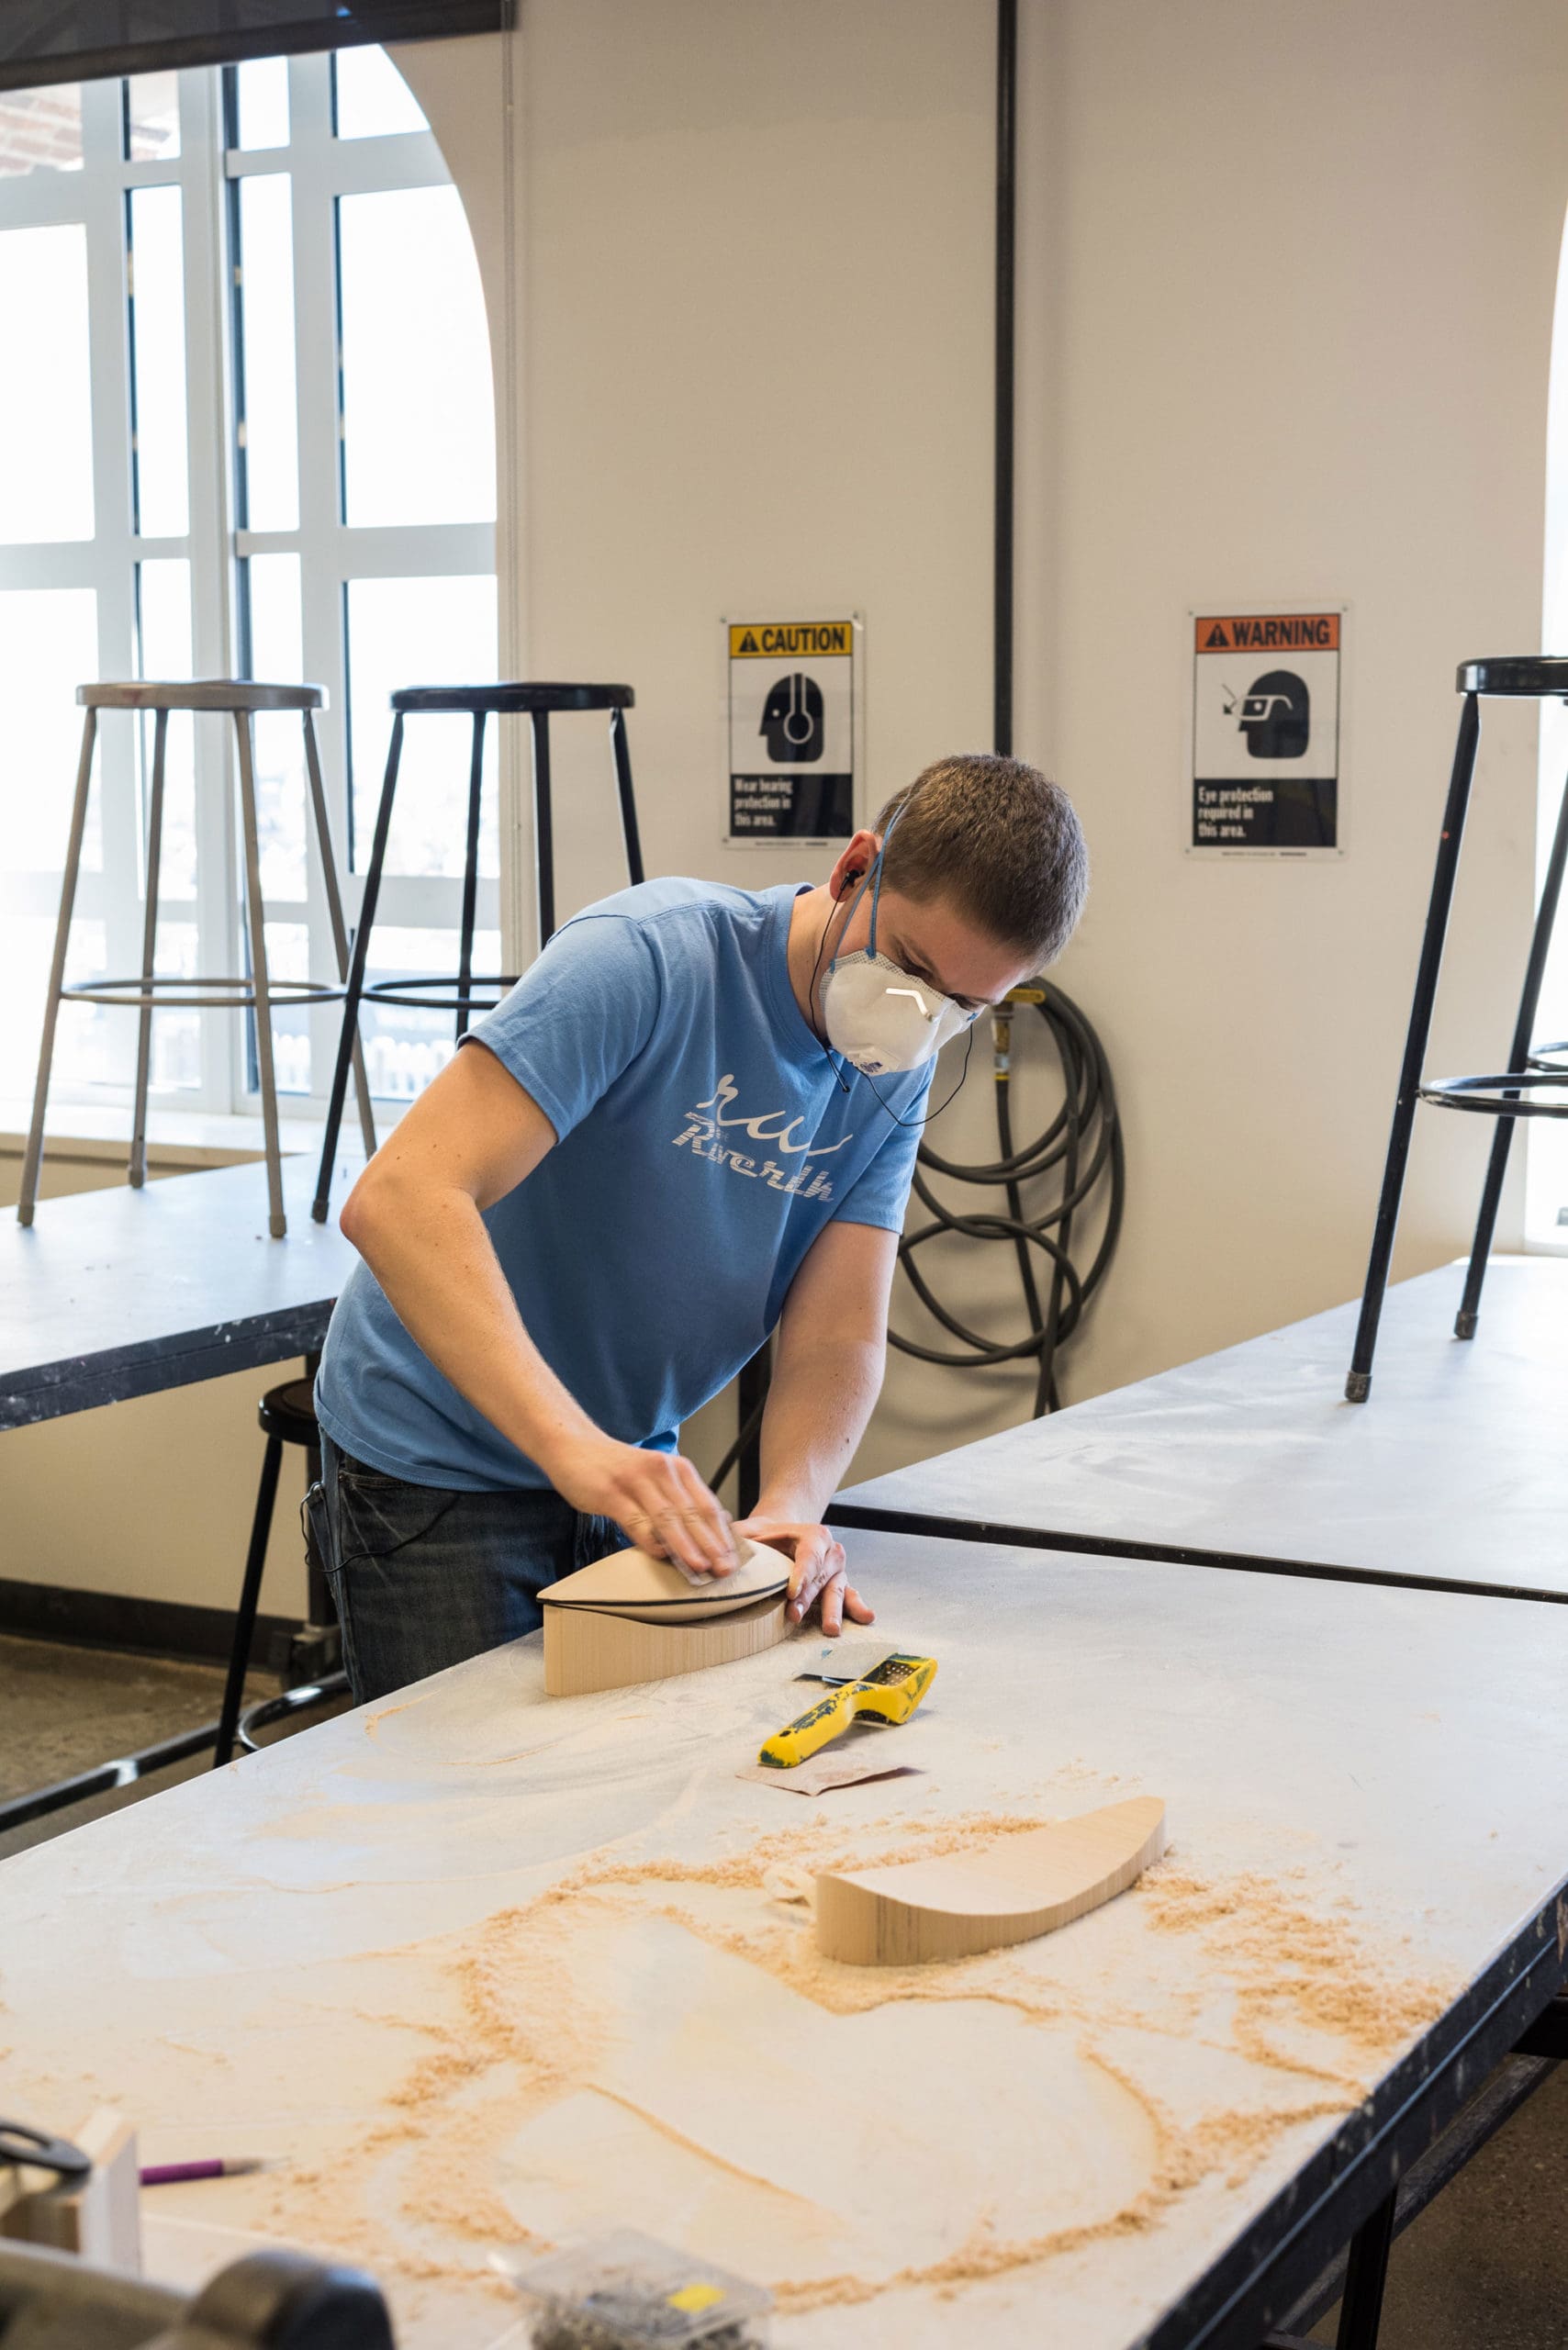 Image of a student sanding a piece of wood in a workshop